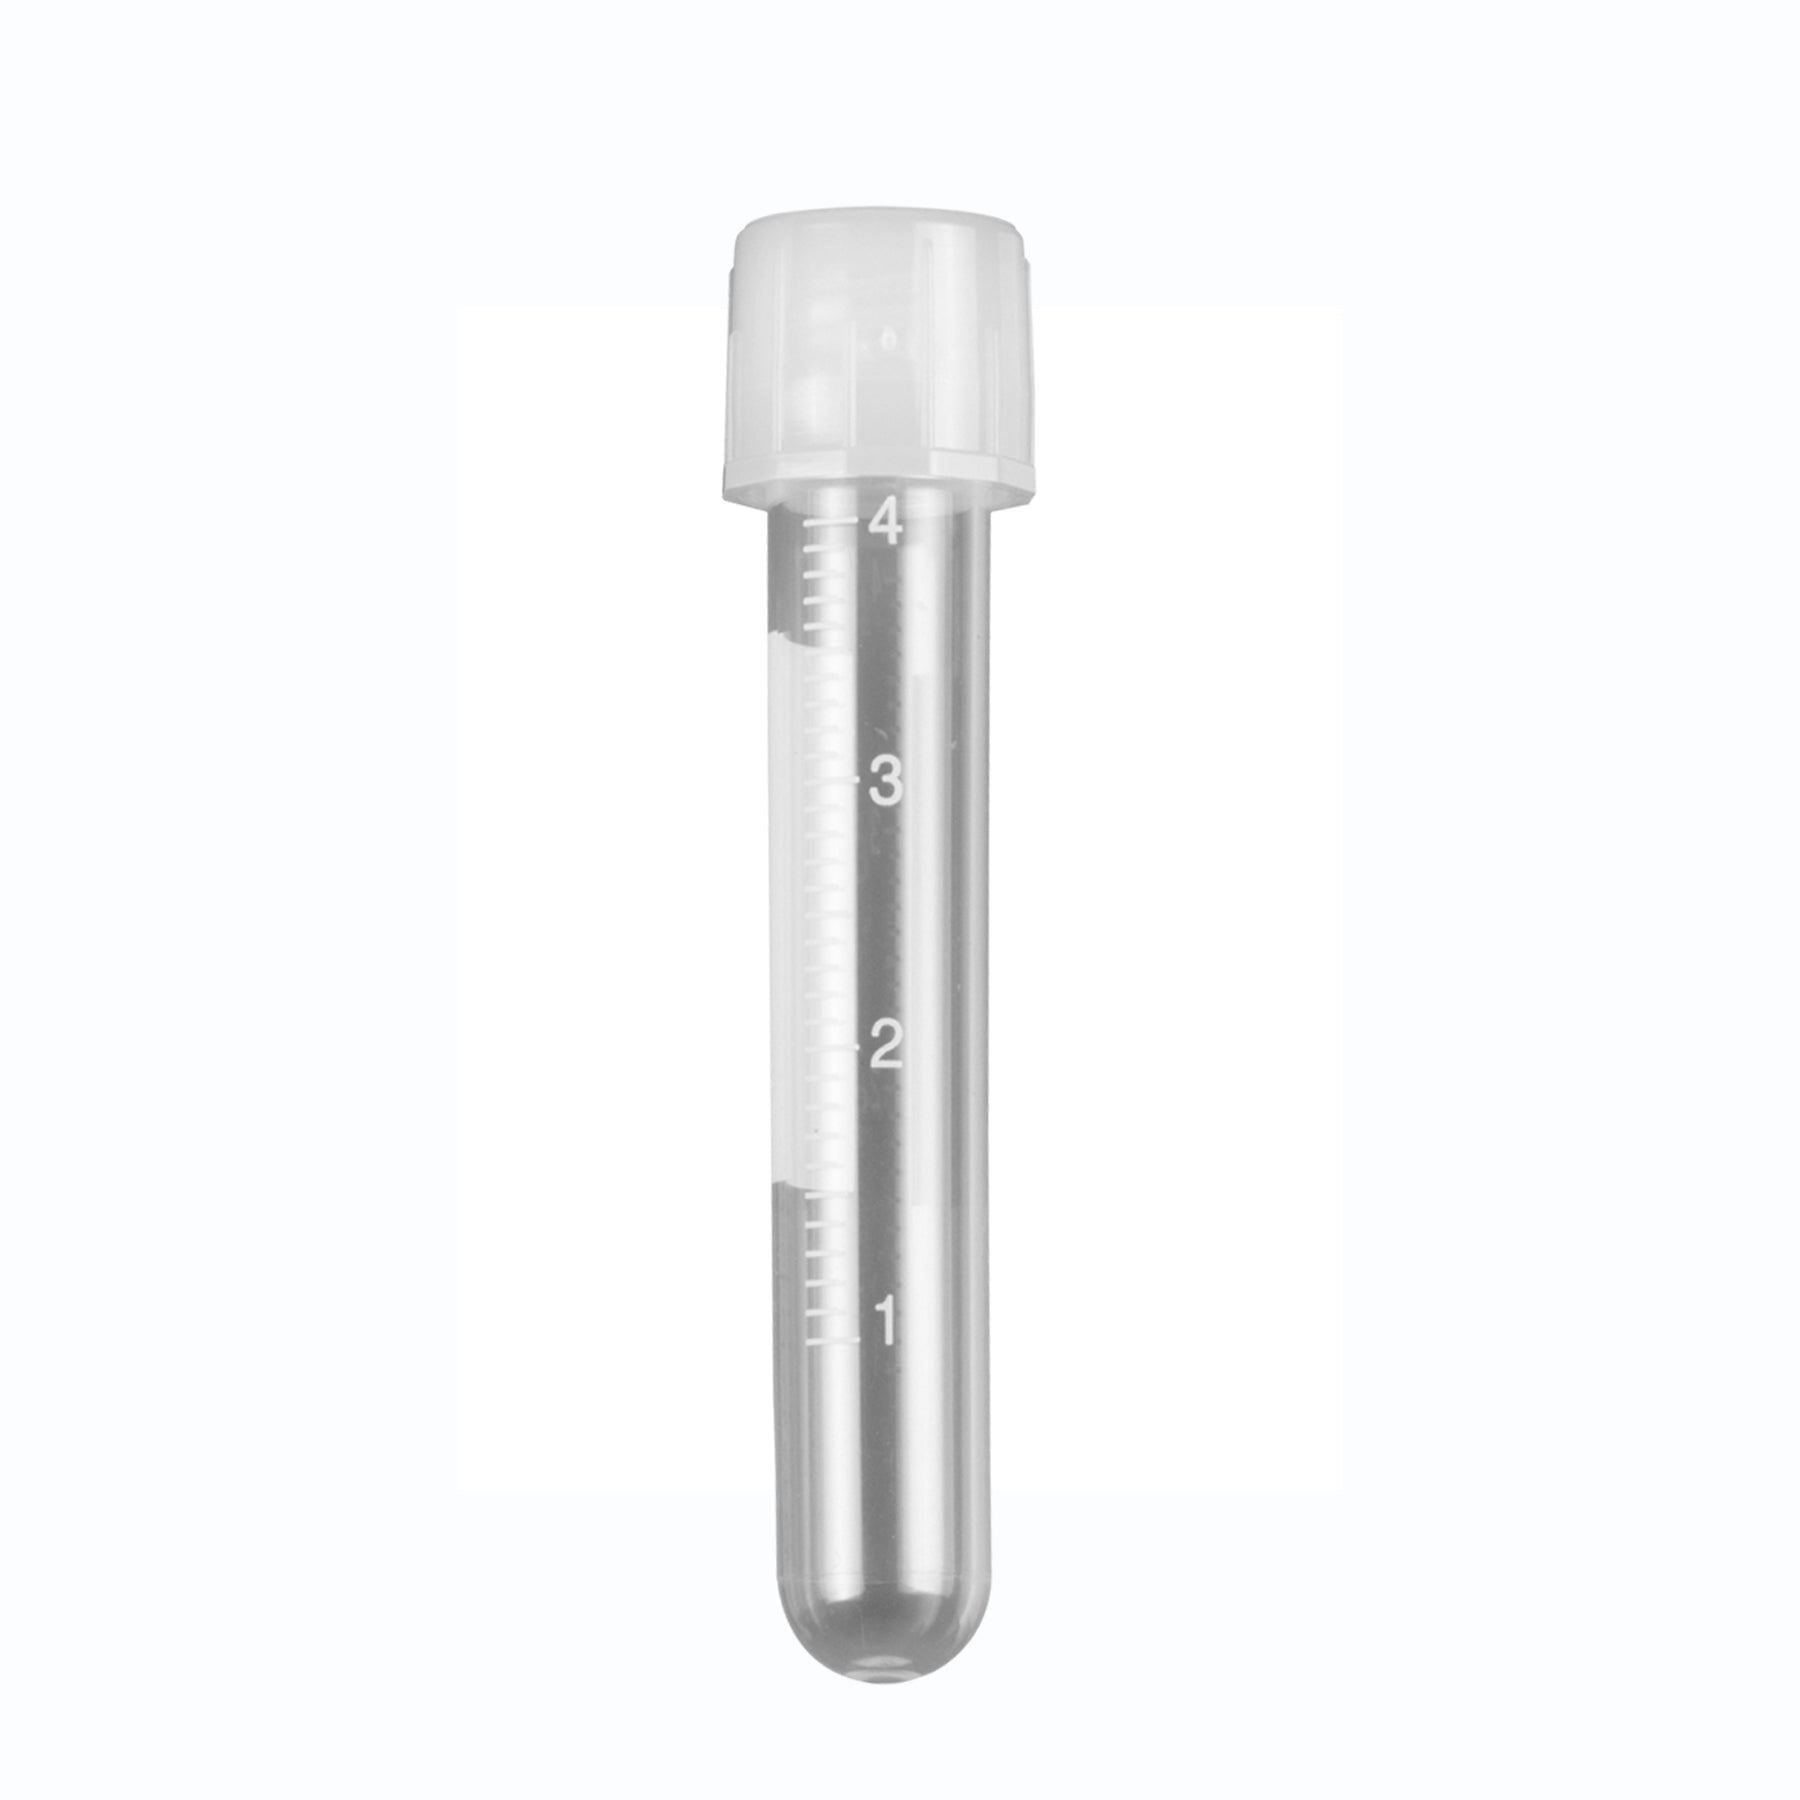 MTC Bio T8750 Culture Tube, 5mL, 12 x 75mm, PP, w/ separate 2-position screw-cap, non-sterile, non-graduated, 1000 tubes and capped bulk packed separately